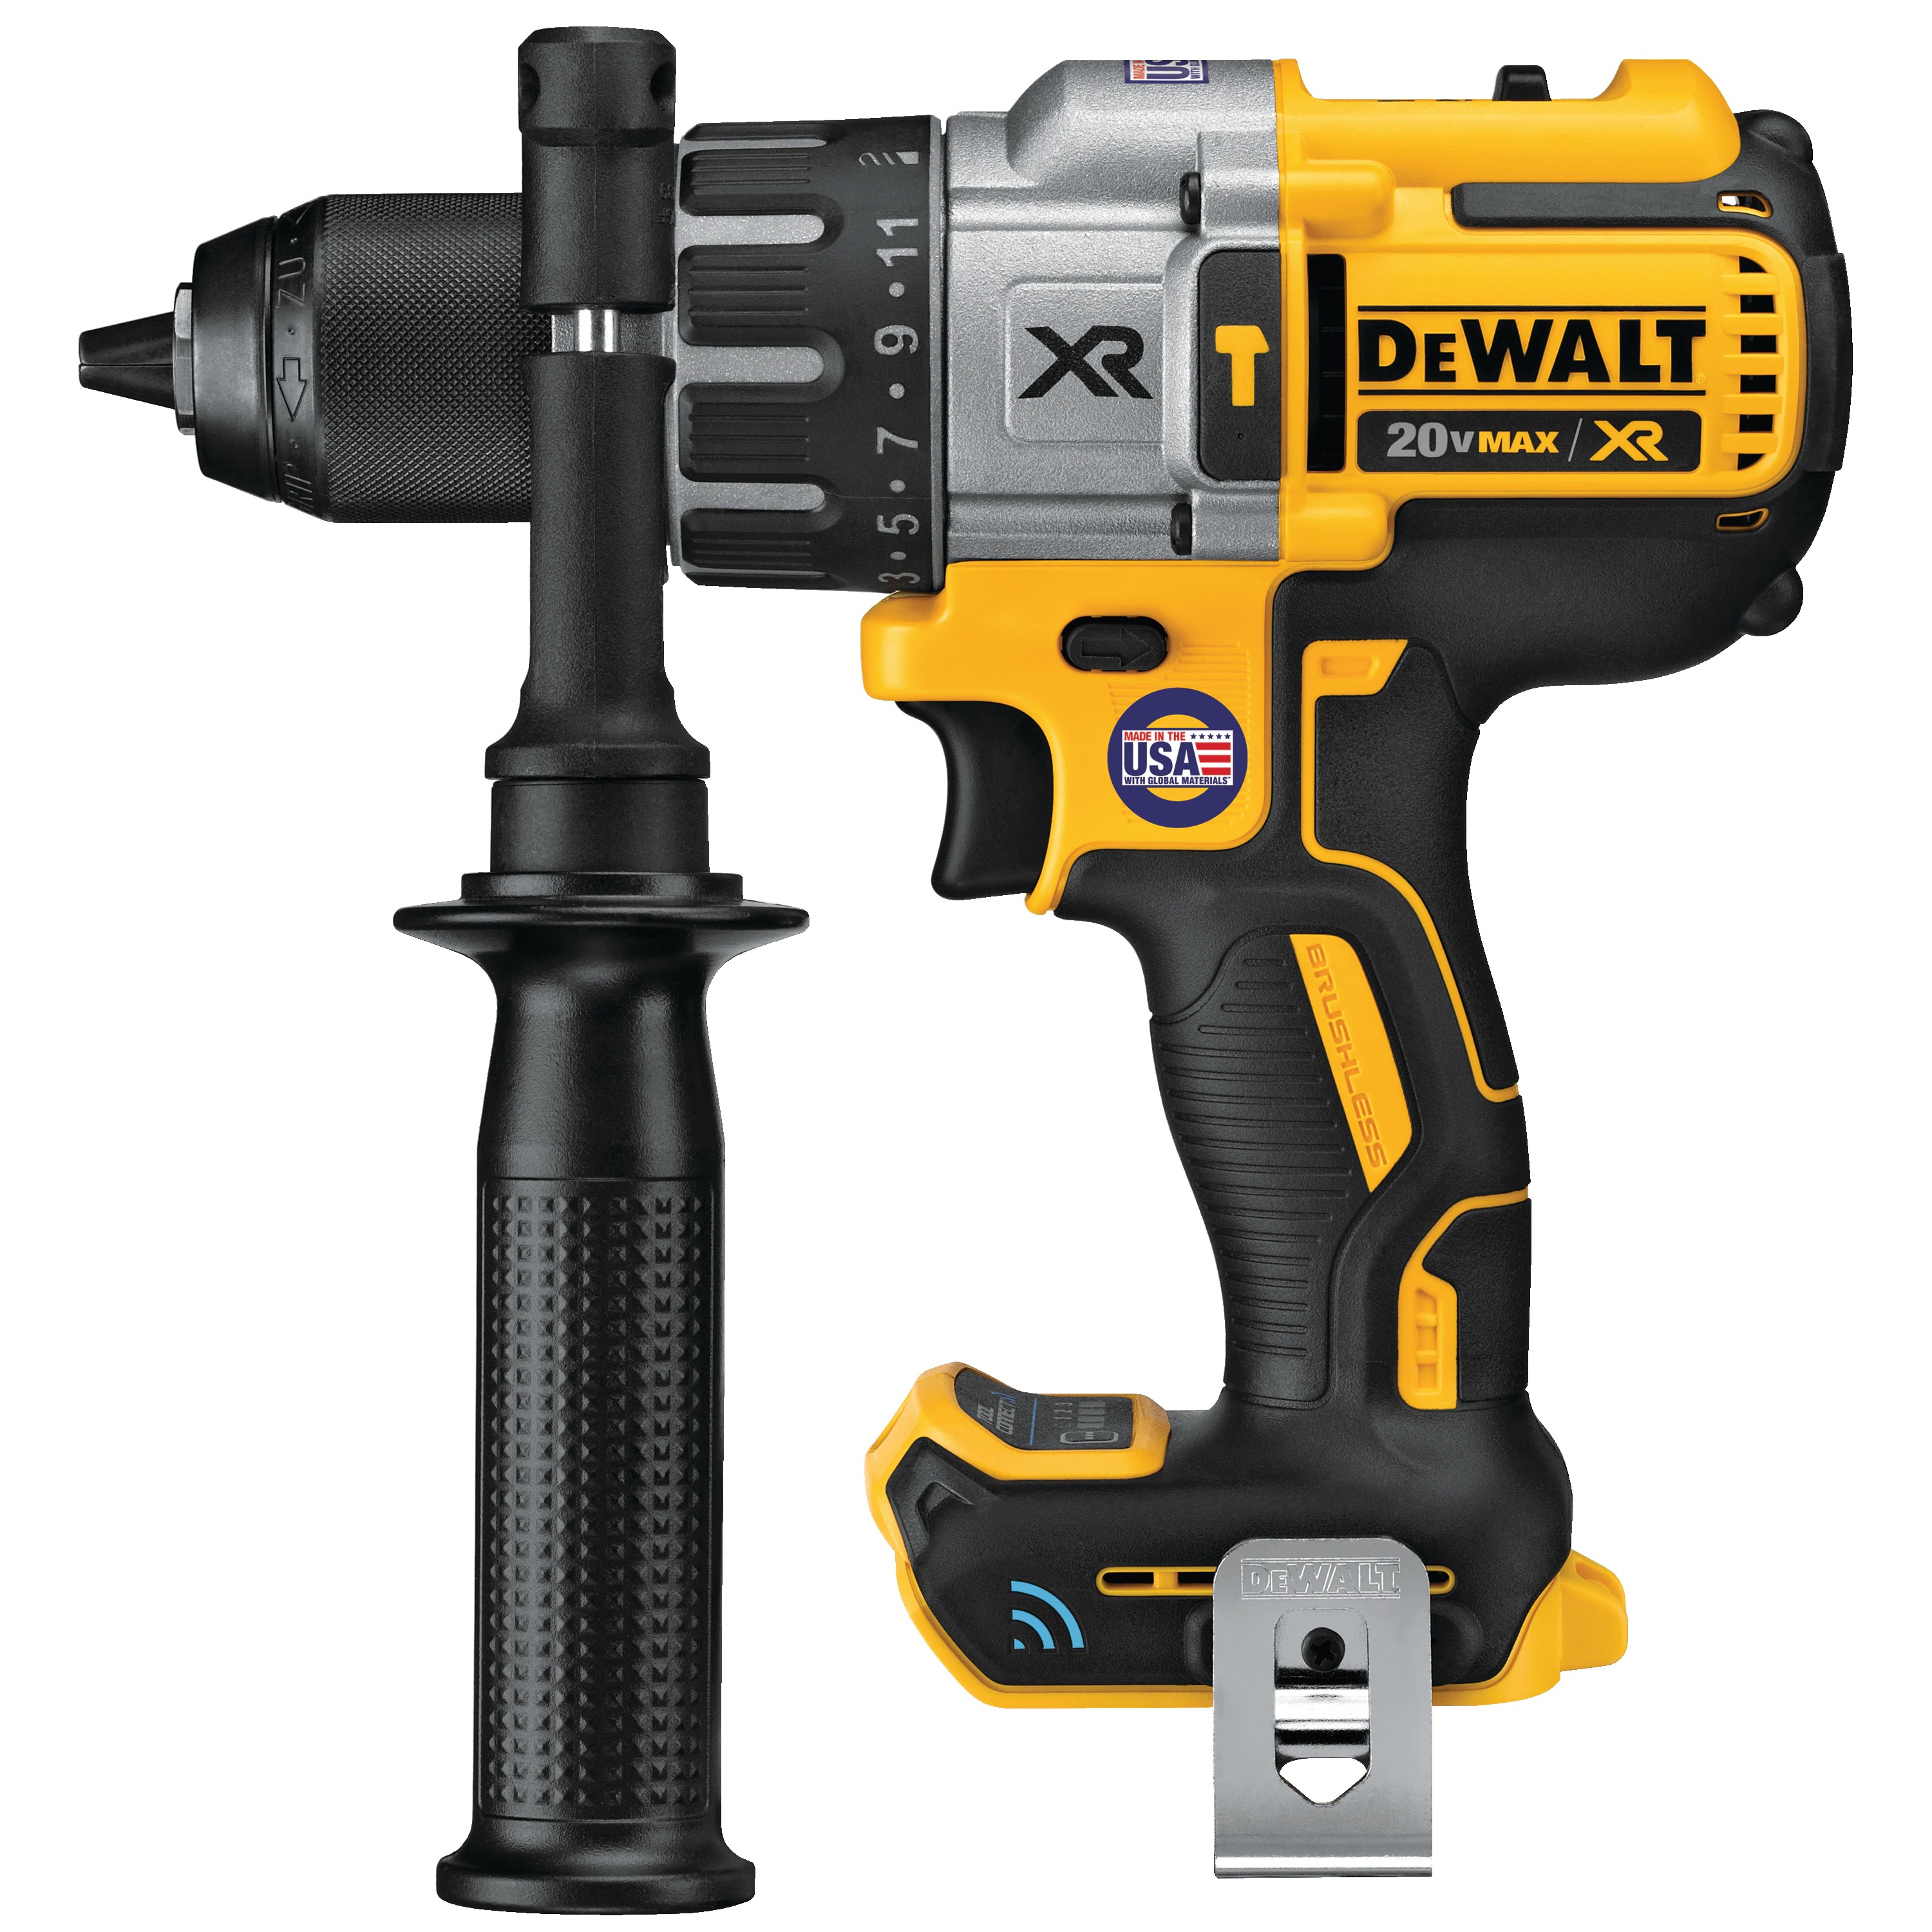 DeWalt 20V MAX* 1/2 in XR® Brushless Cordless Hammer Drill/Driver (Tool Only) - Utility and Pocket Knives